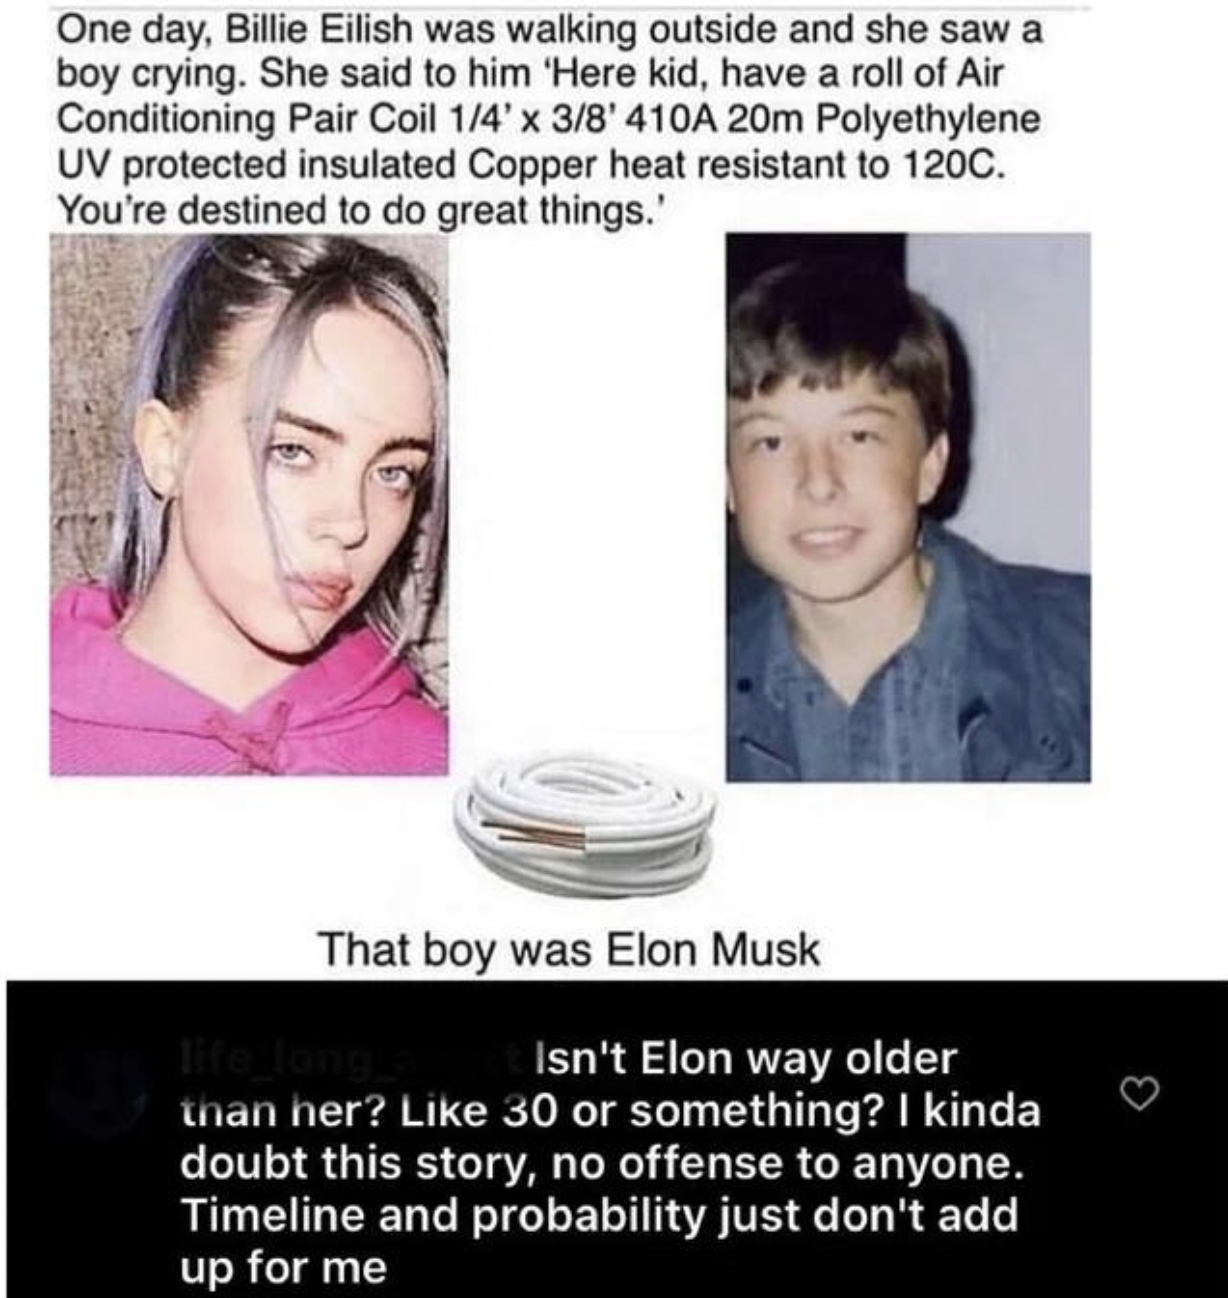 People Who Don't Get the Joke - One day, Billie Eilish was walking outside and she saw a boy crying. She said to him 'Here kid, have a roll of Air Conditioning Pair Coil